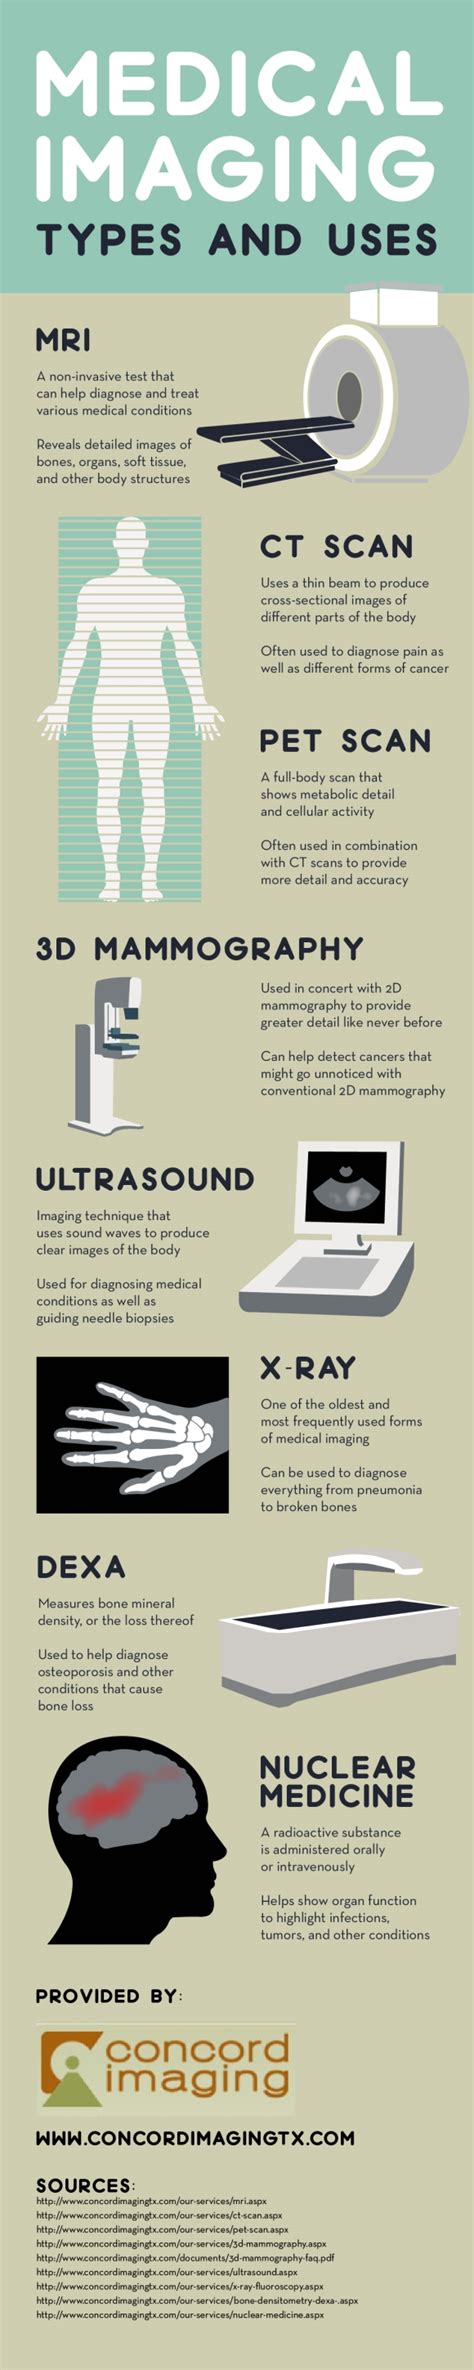 3d Mammography Is An Imaging Technique That Can Provide Great Detail